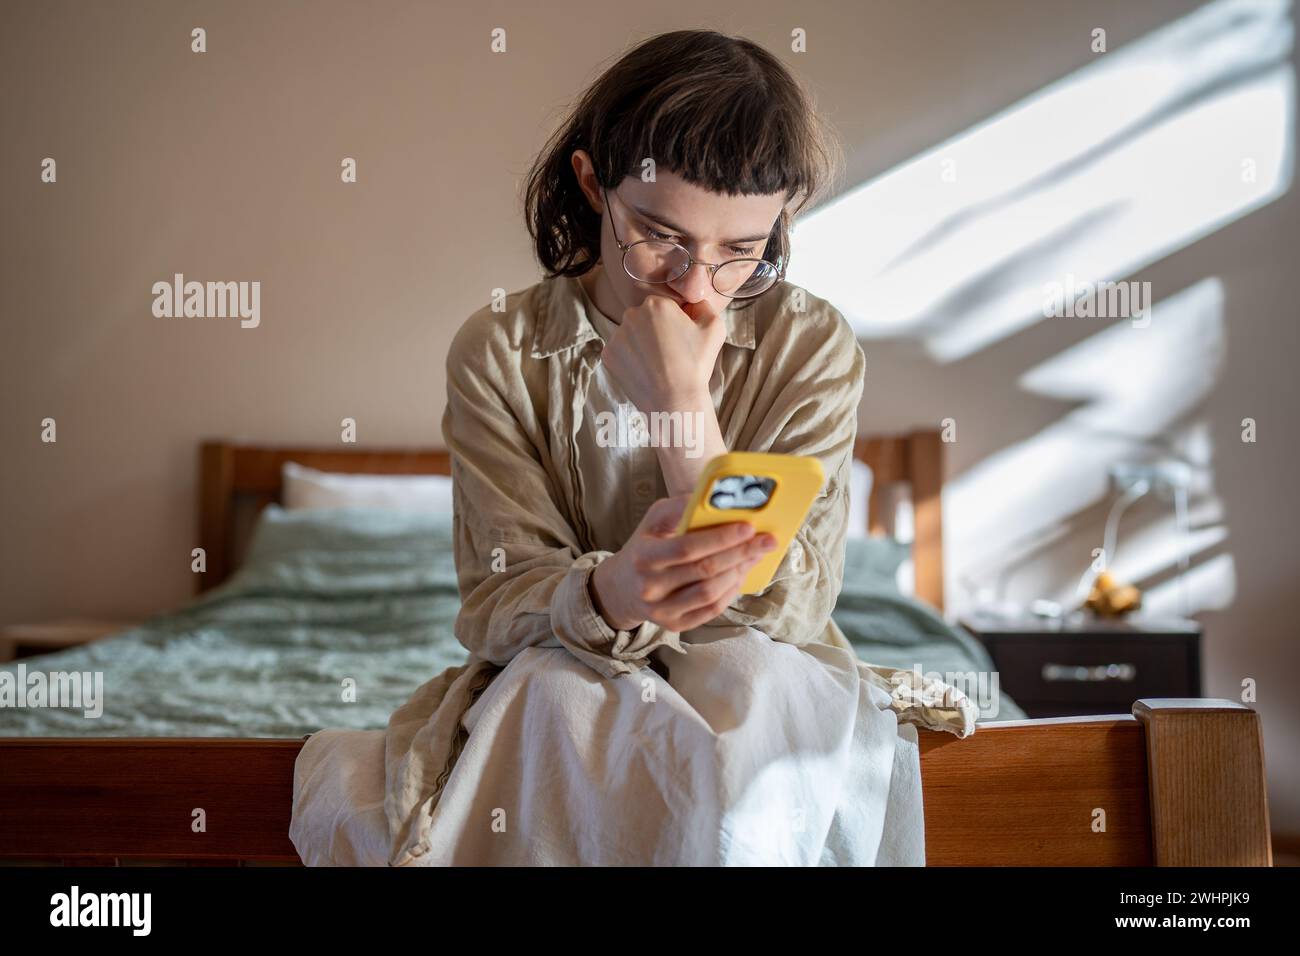 Outcast teenage girl having social difficulties in communication spending time at home in solitude Stock Photo